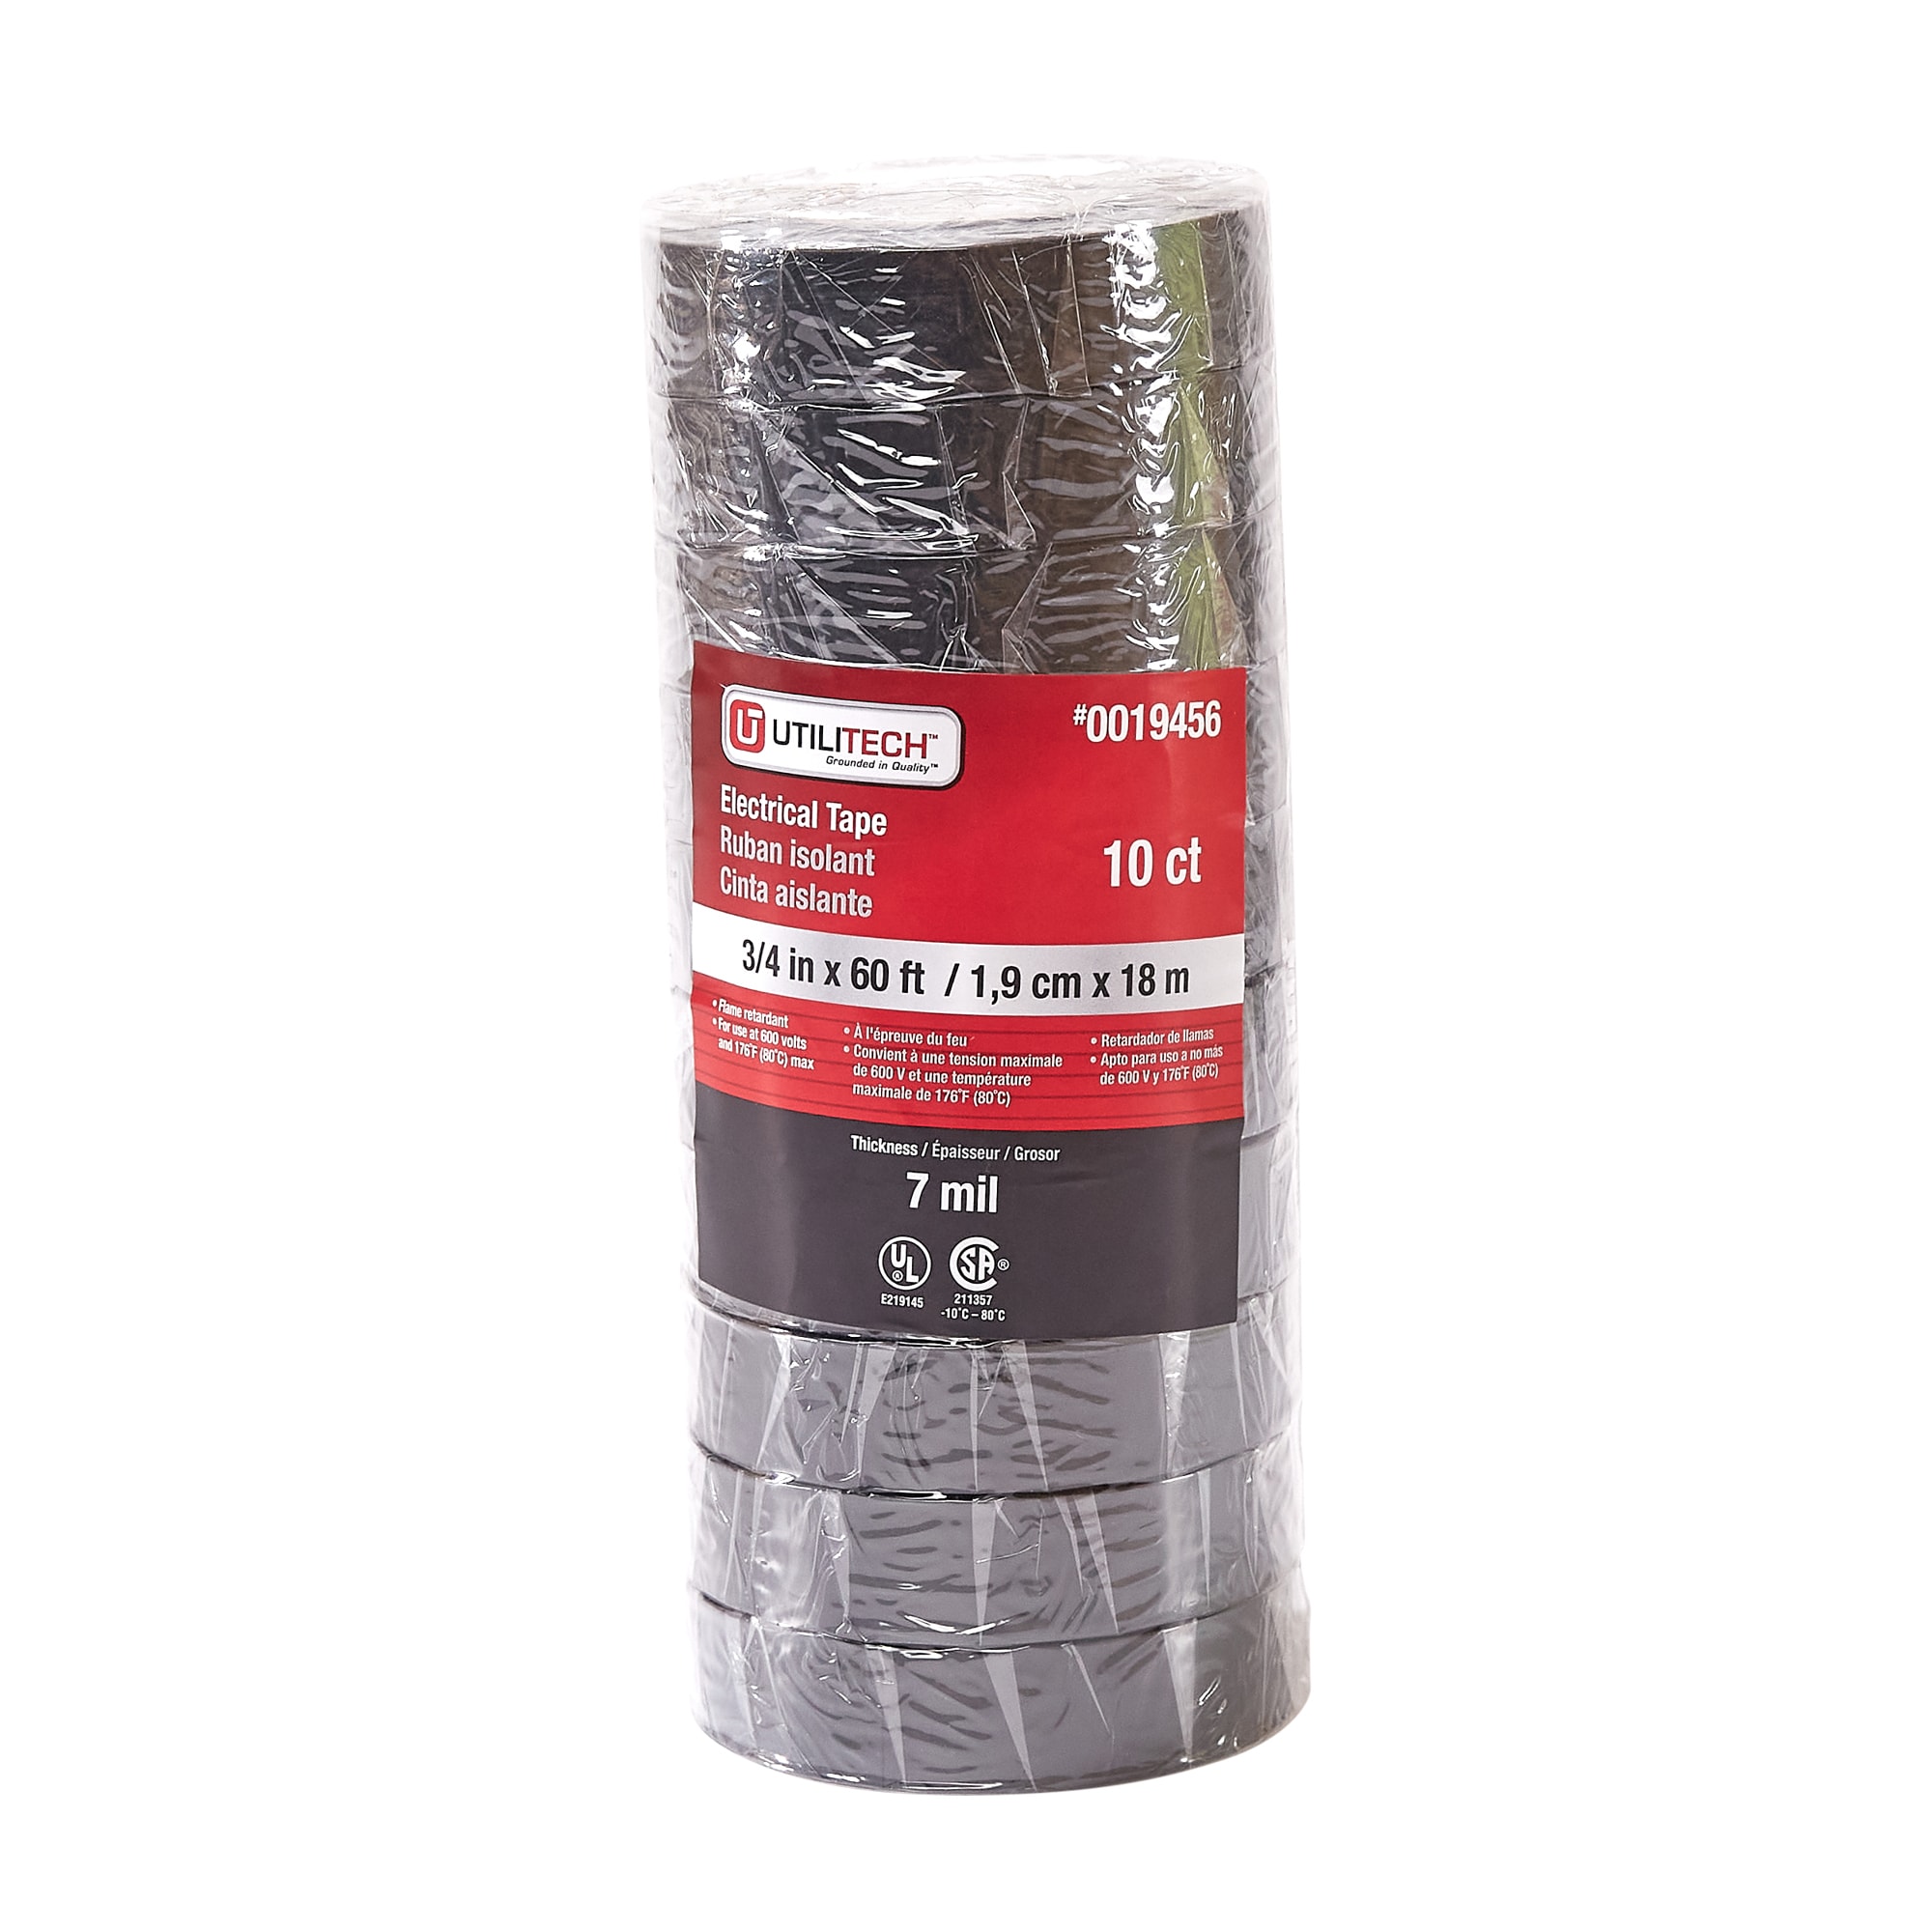 Utilitech 60-ft Black Electrical Wire Tape 10 Roll Per Pack FREE SHIPPING! 